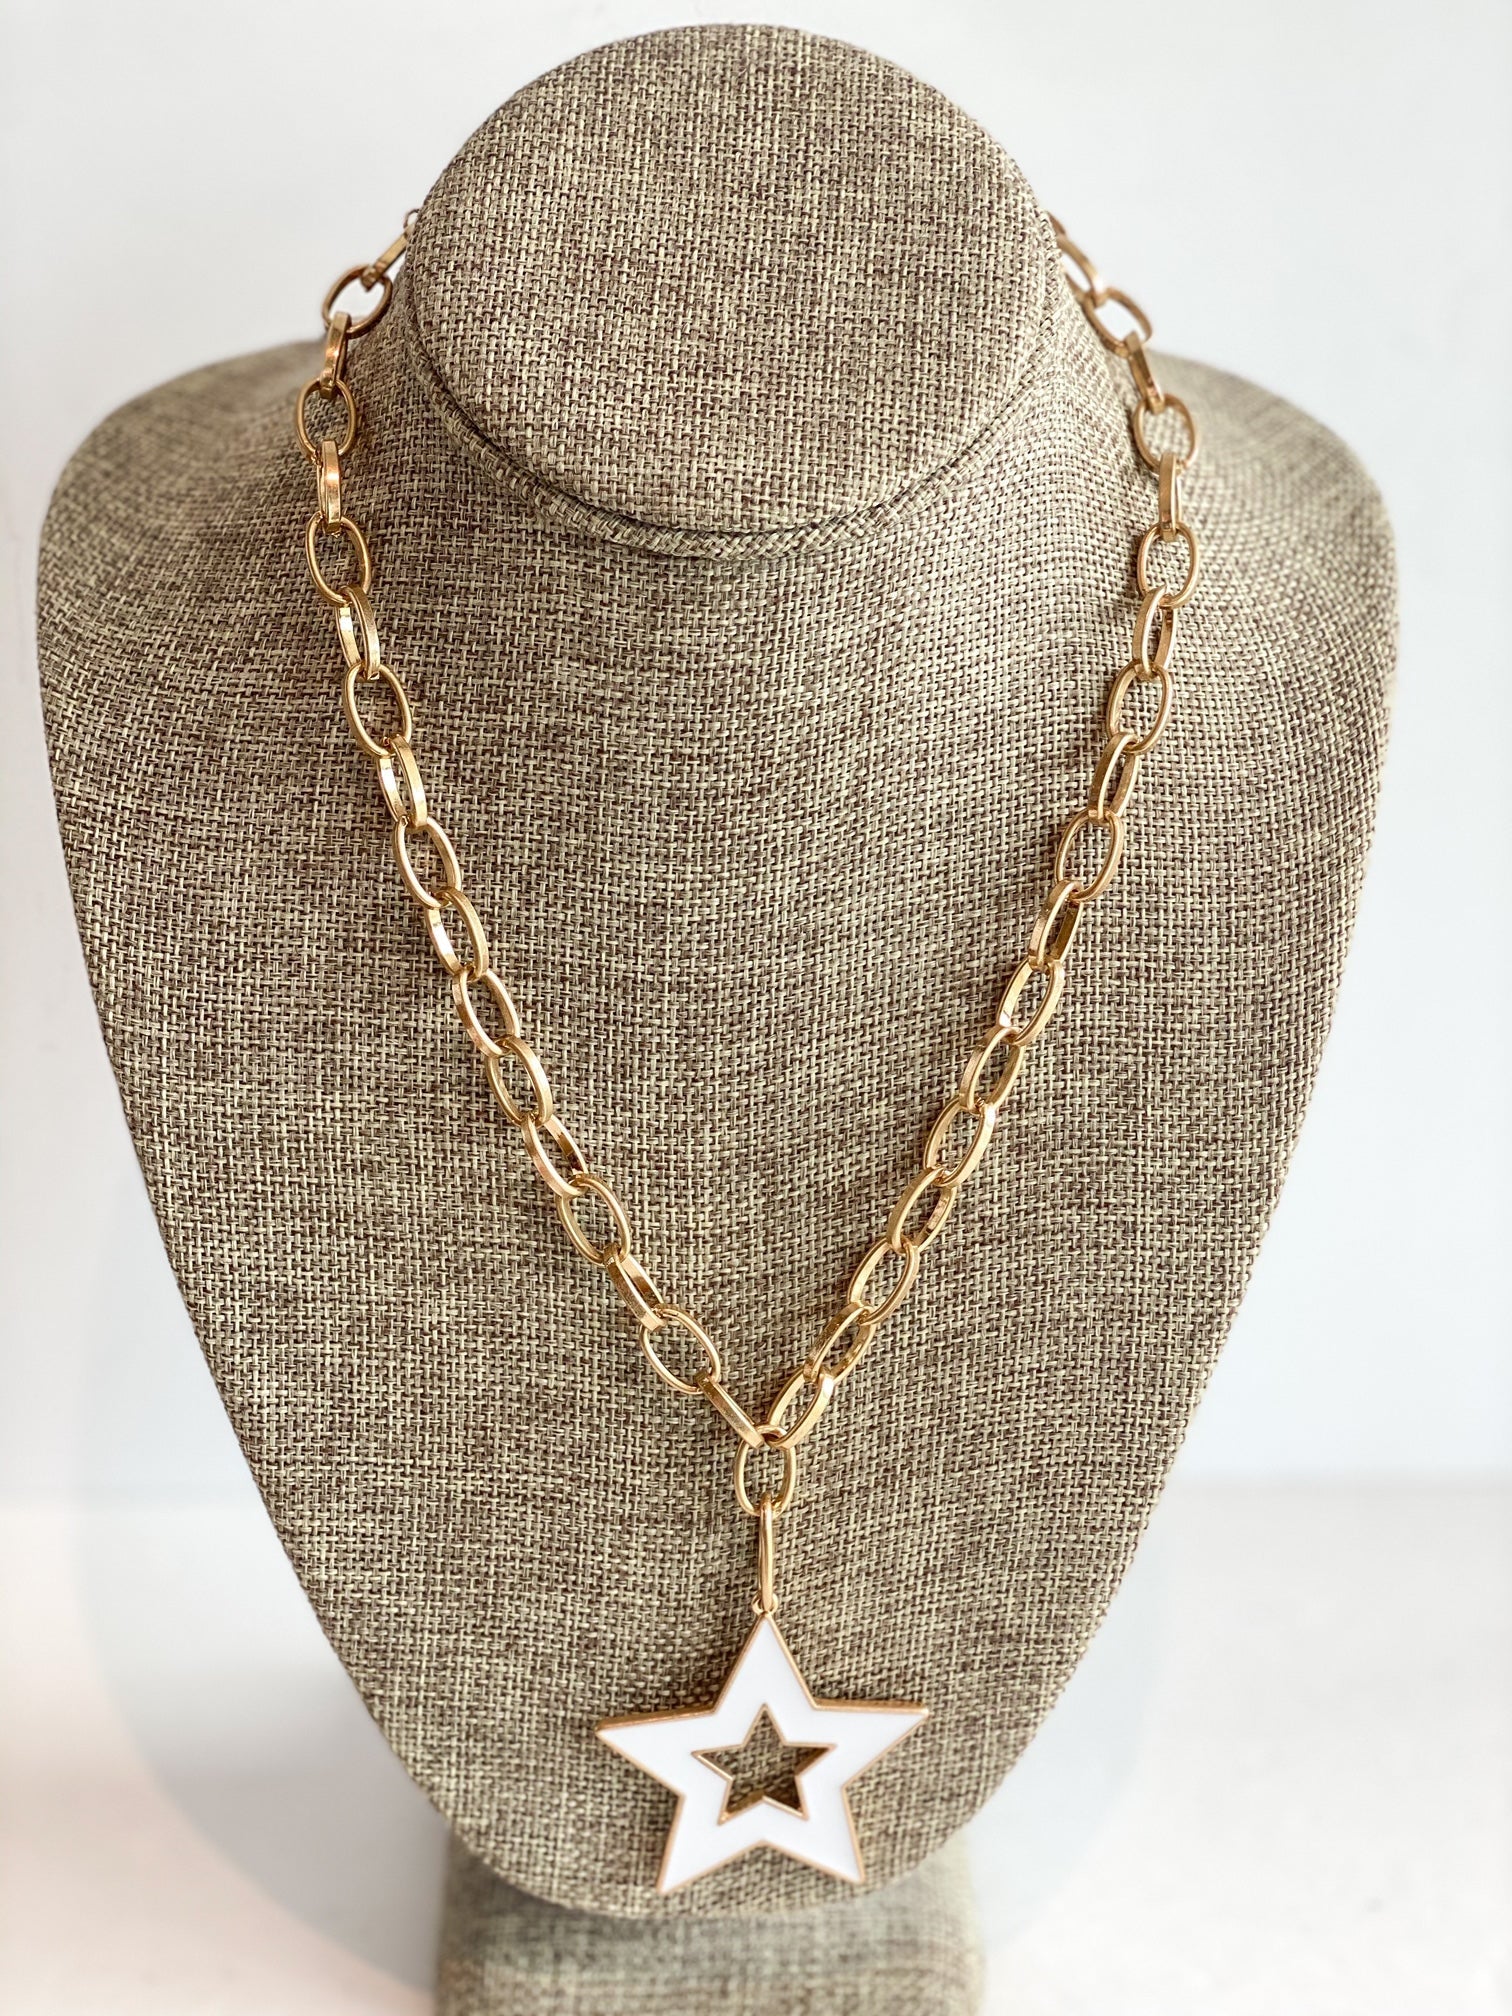 white star necklace large